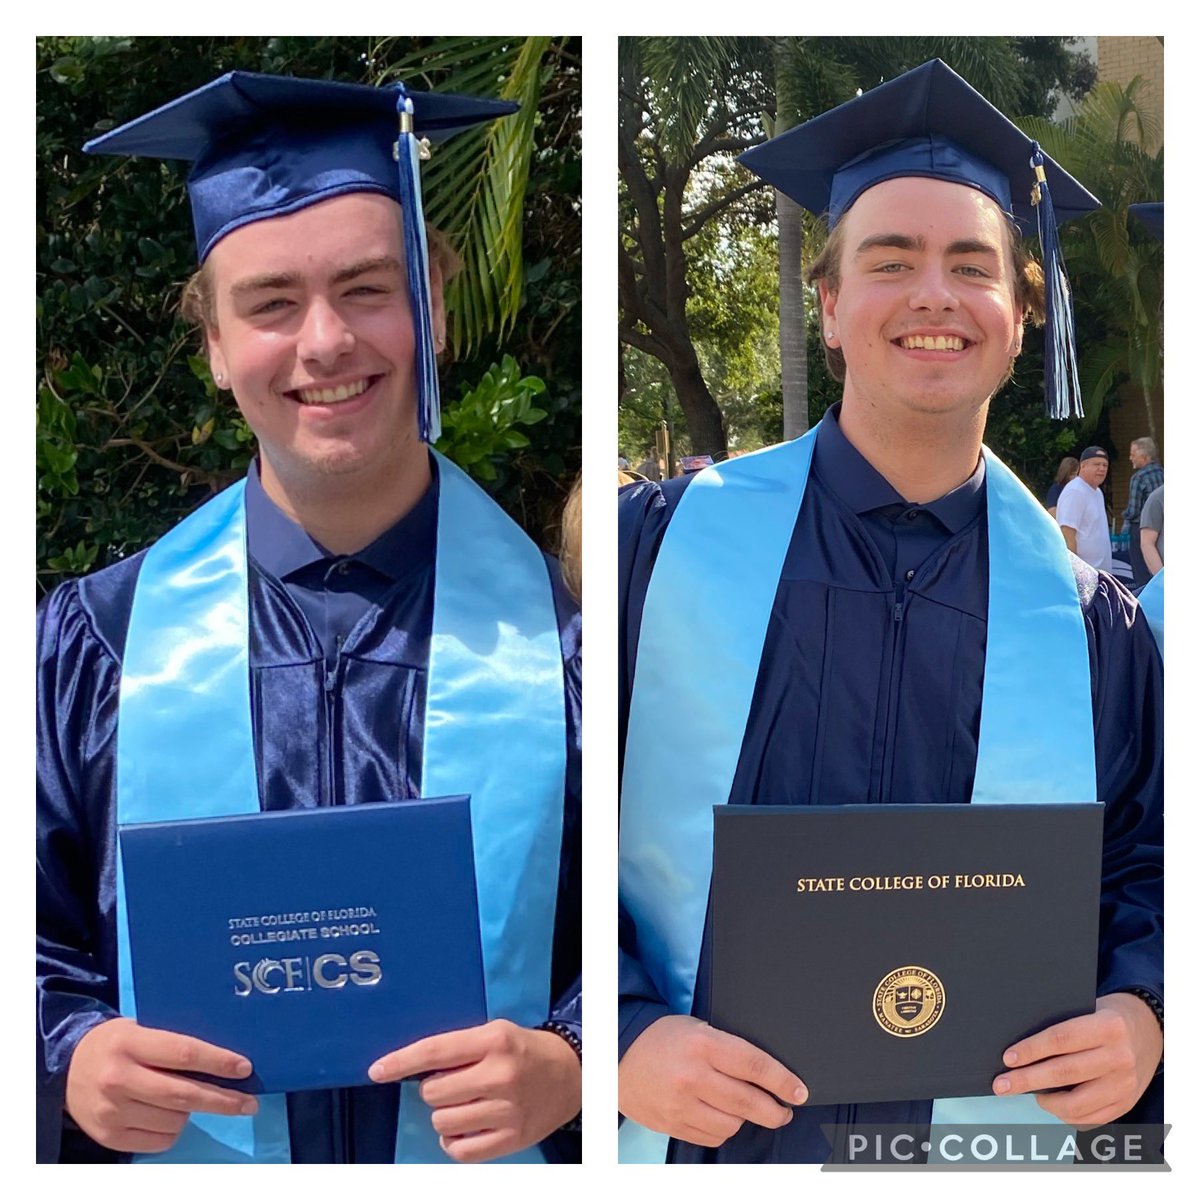 I want to give a HUGE shoutout to my son for graduating both high school and college this past Friday. Thank you @SCFnow for giving my son a successful start at both SCFCS and SCF #SCFProud #HSgraduate #collegegraduate #dualenrollment